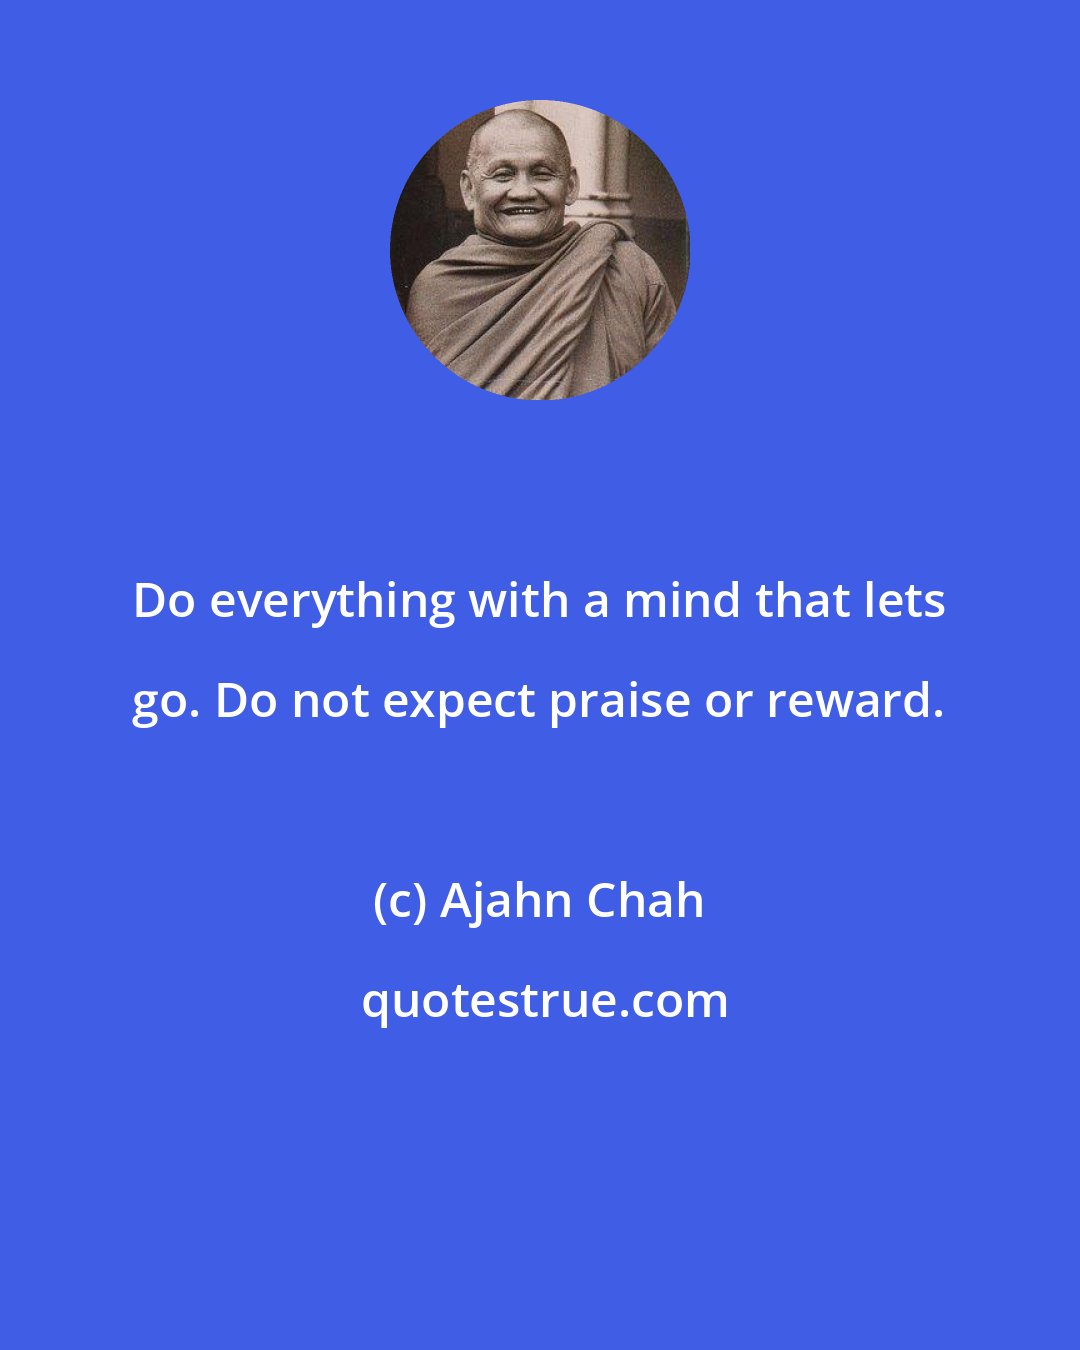 Ajahn Chah: Do everything with a mind that lets go. Do not expect praise or reward.